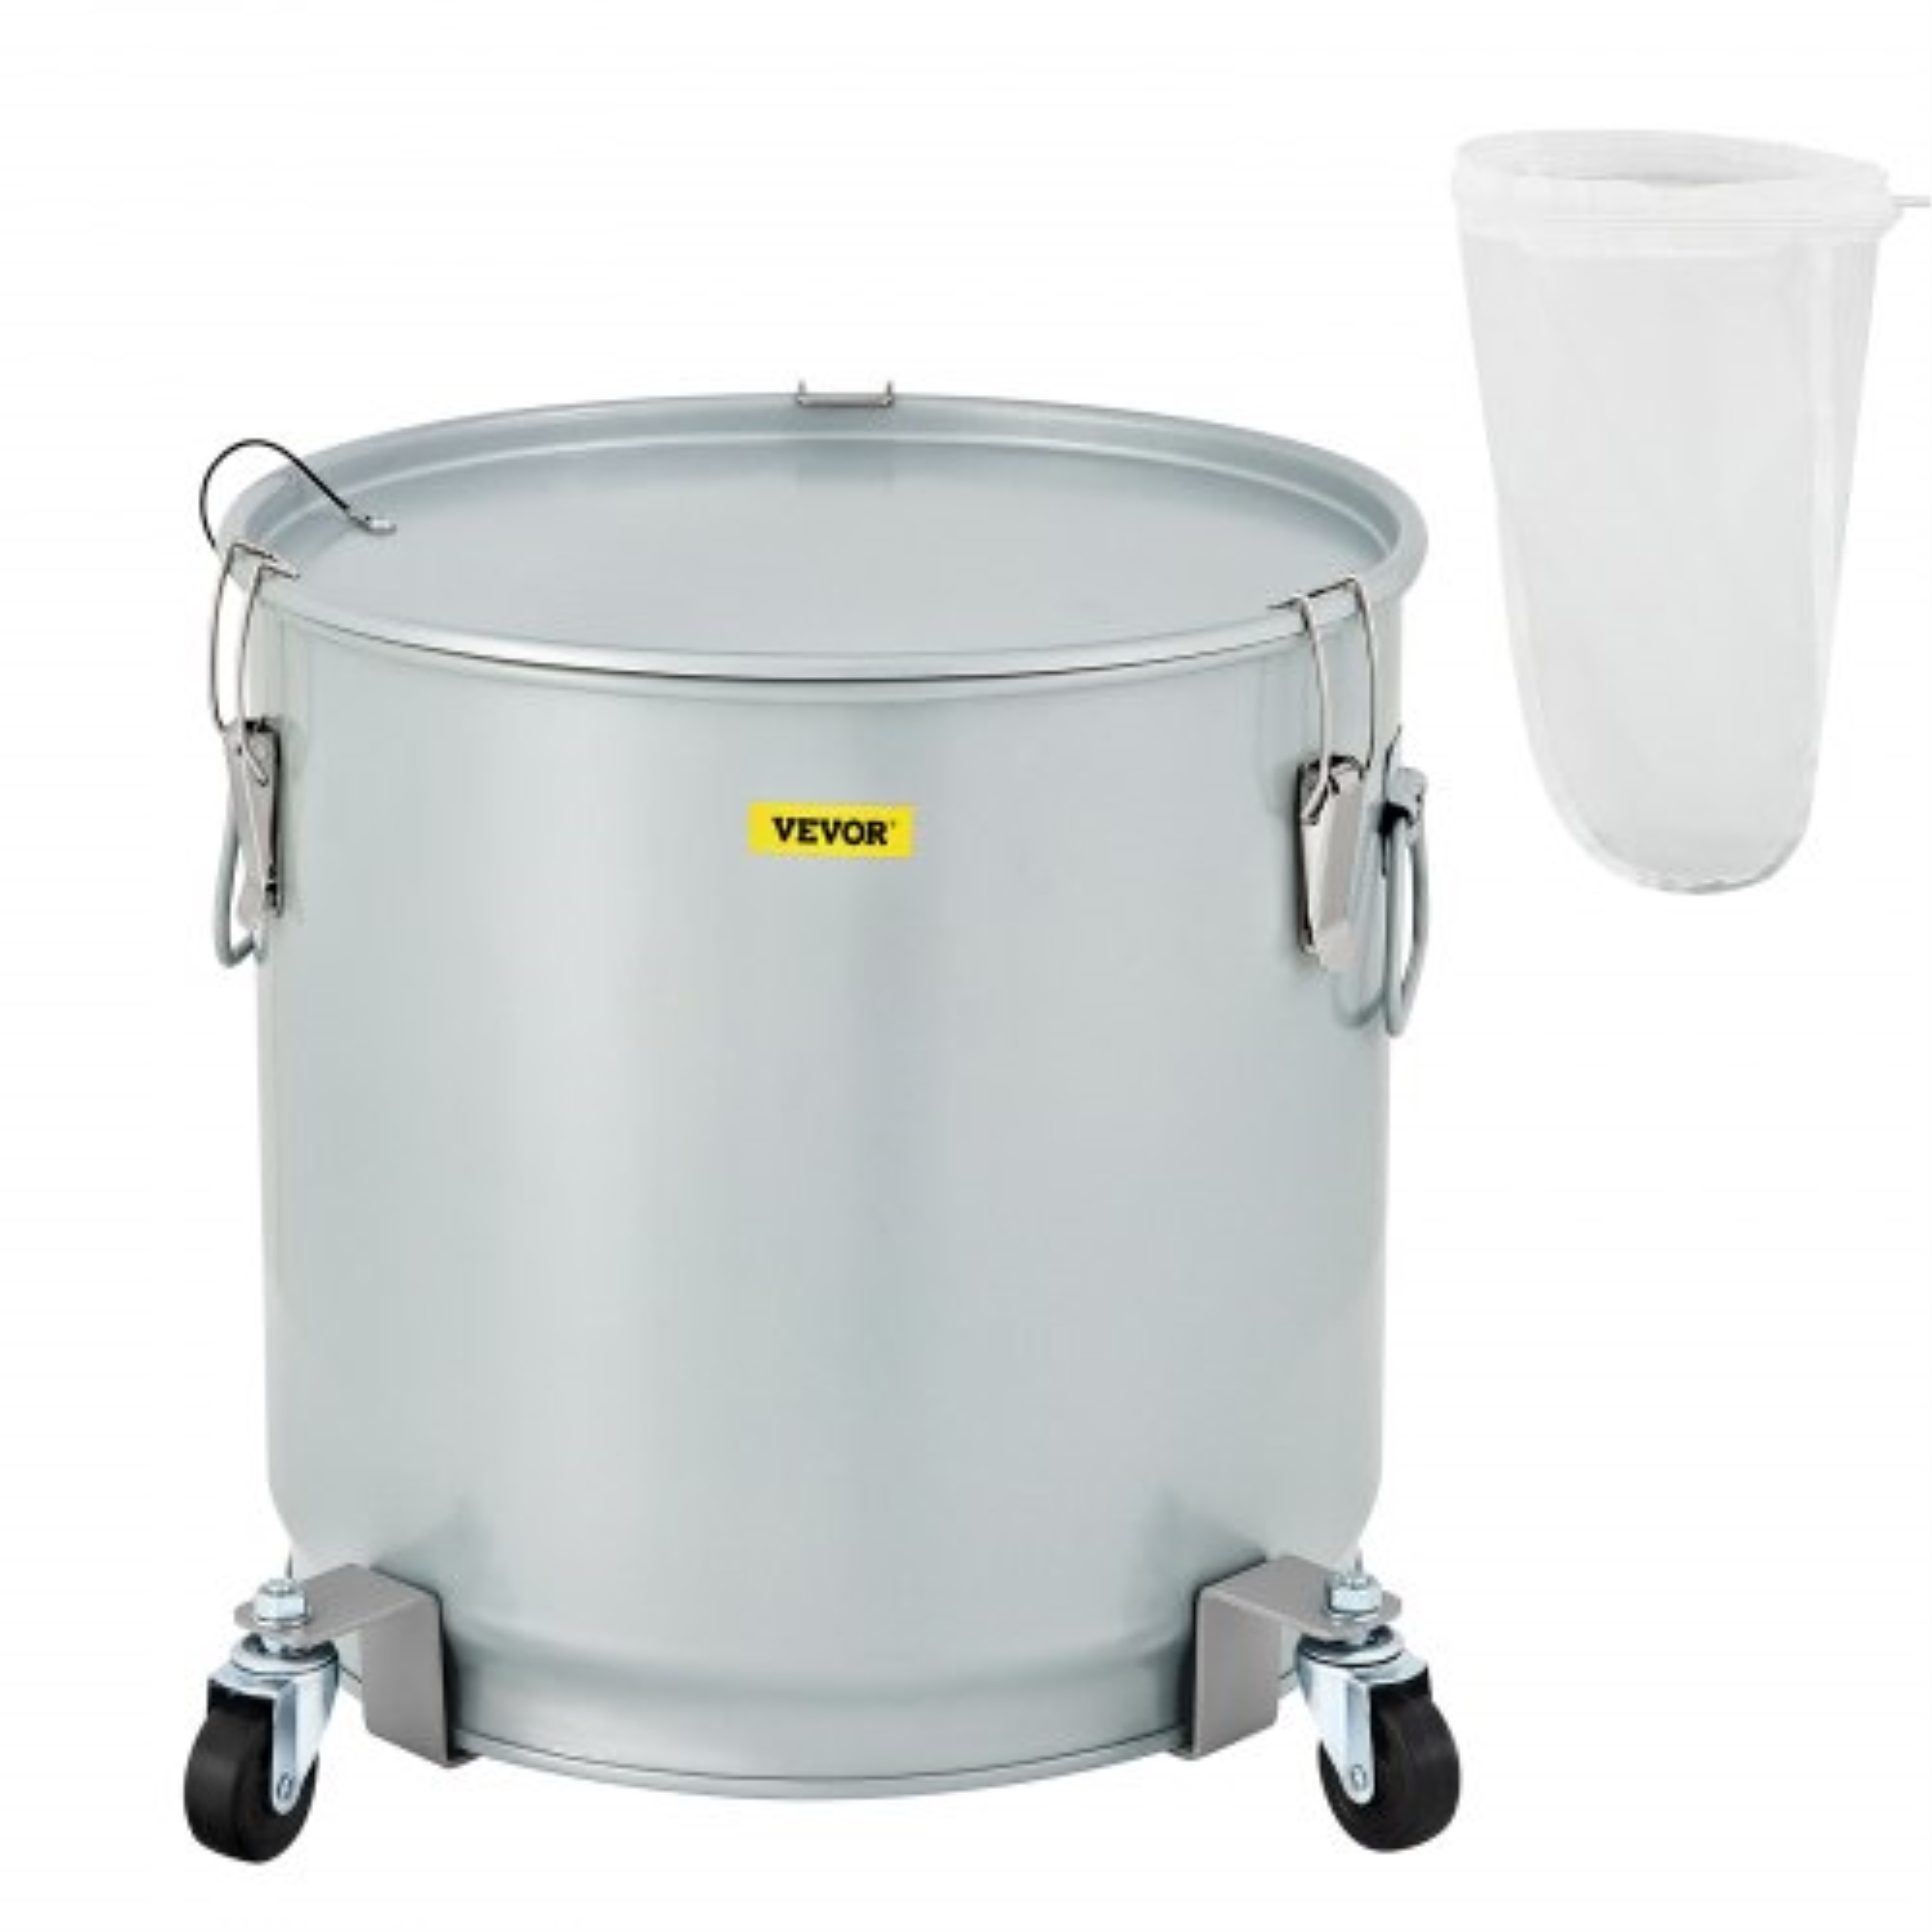 VEVOR Fryer Grease Bucket, 15.9 Gal/60 L, Coated Carbon Steel Oil Filter Pot with Caster Base, Oil Disposal Caddy with 123 LBS